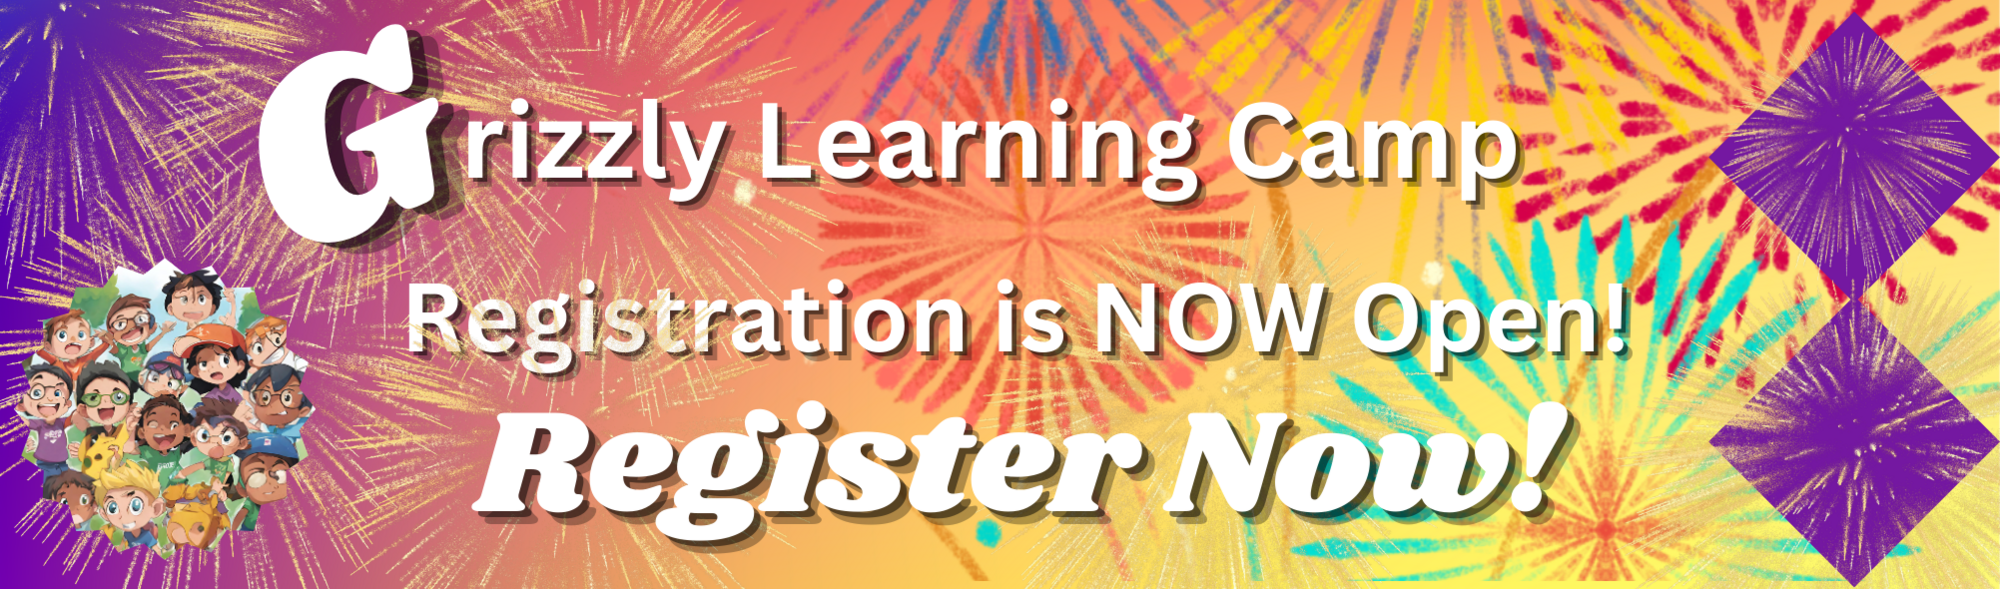 Grizzly Learning Camp is Coming!  - Registration is now open!